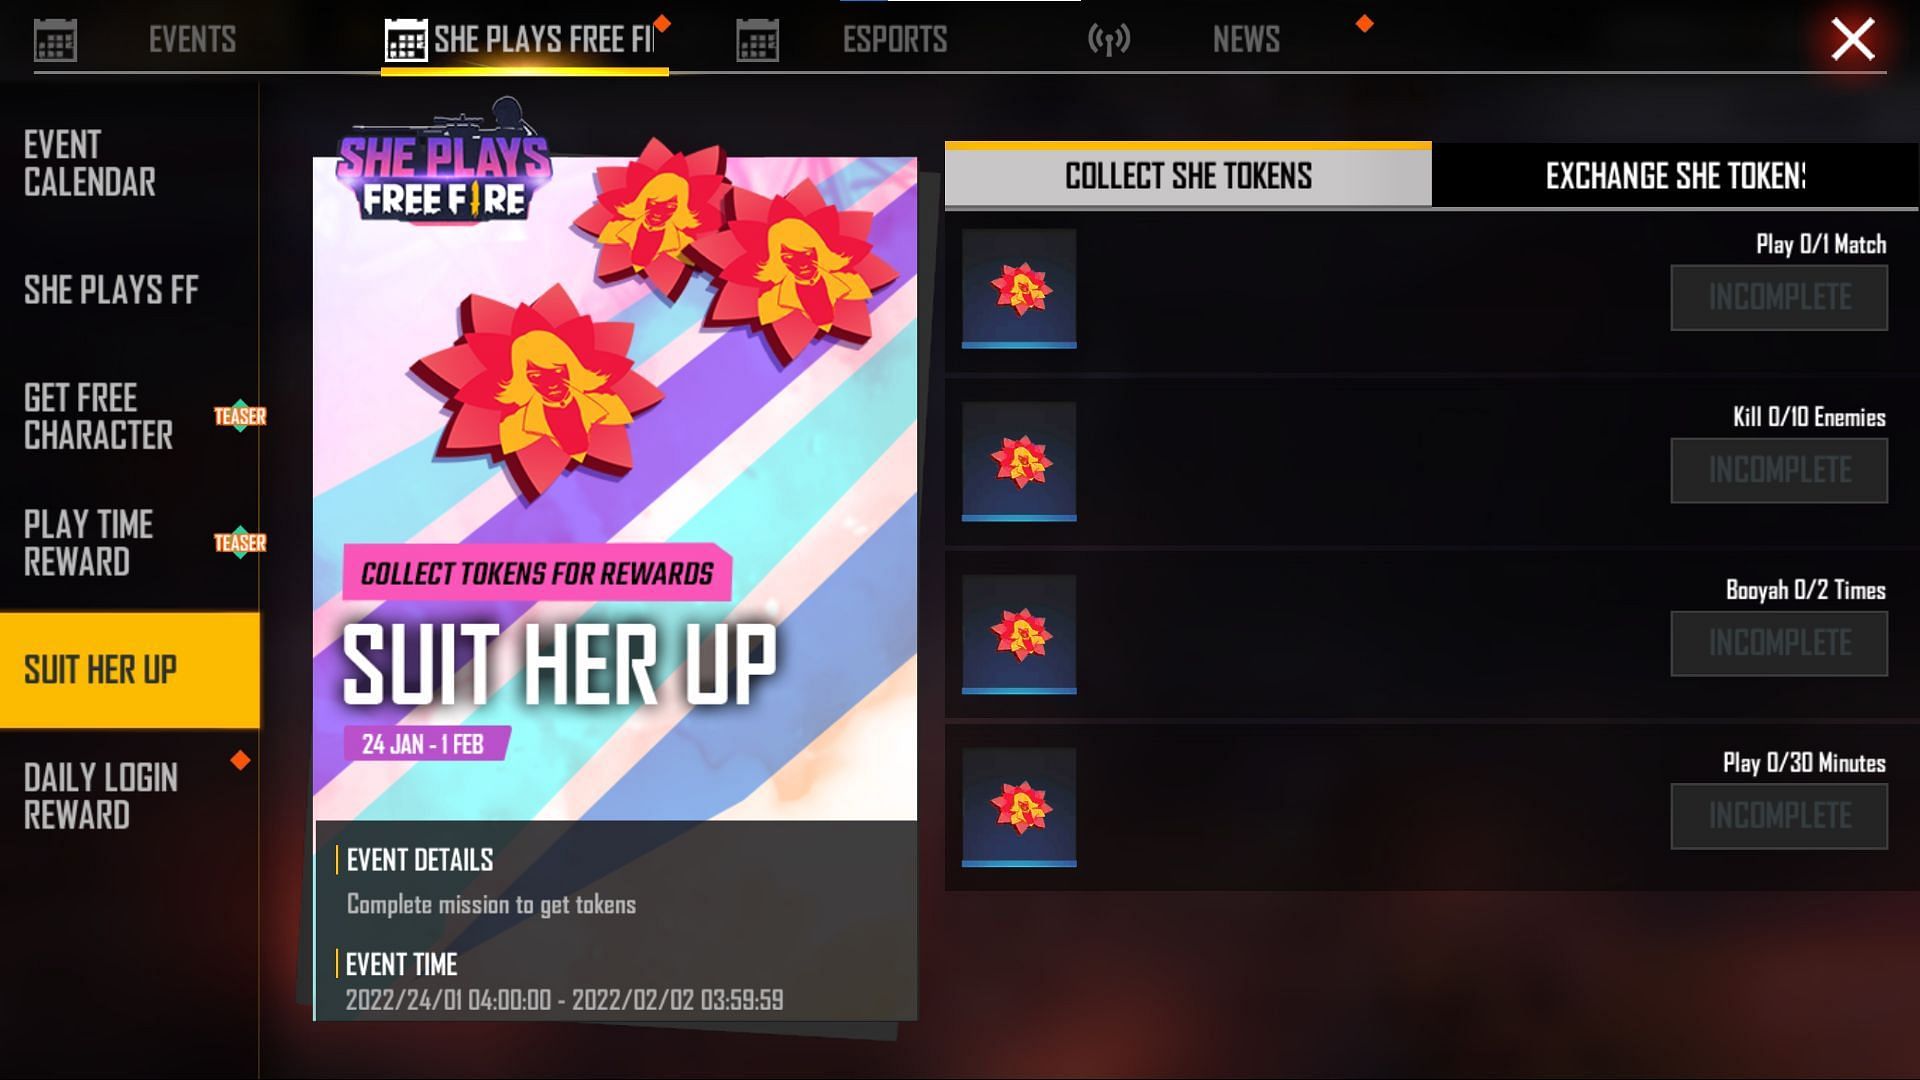 Saved all tokens from the play like a pro event and got the Parkour  bundle on the very first day : r/freefire